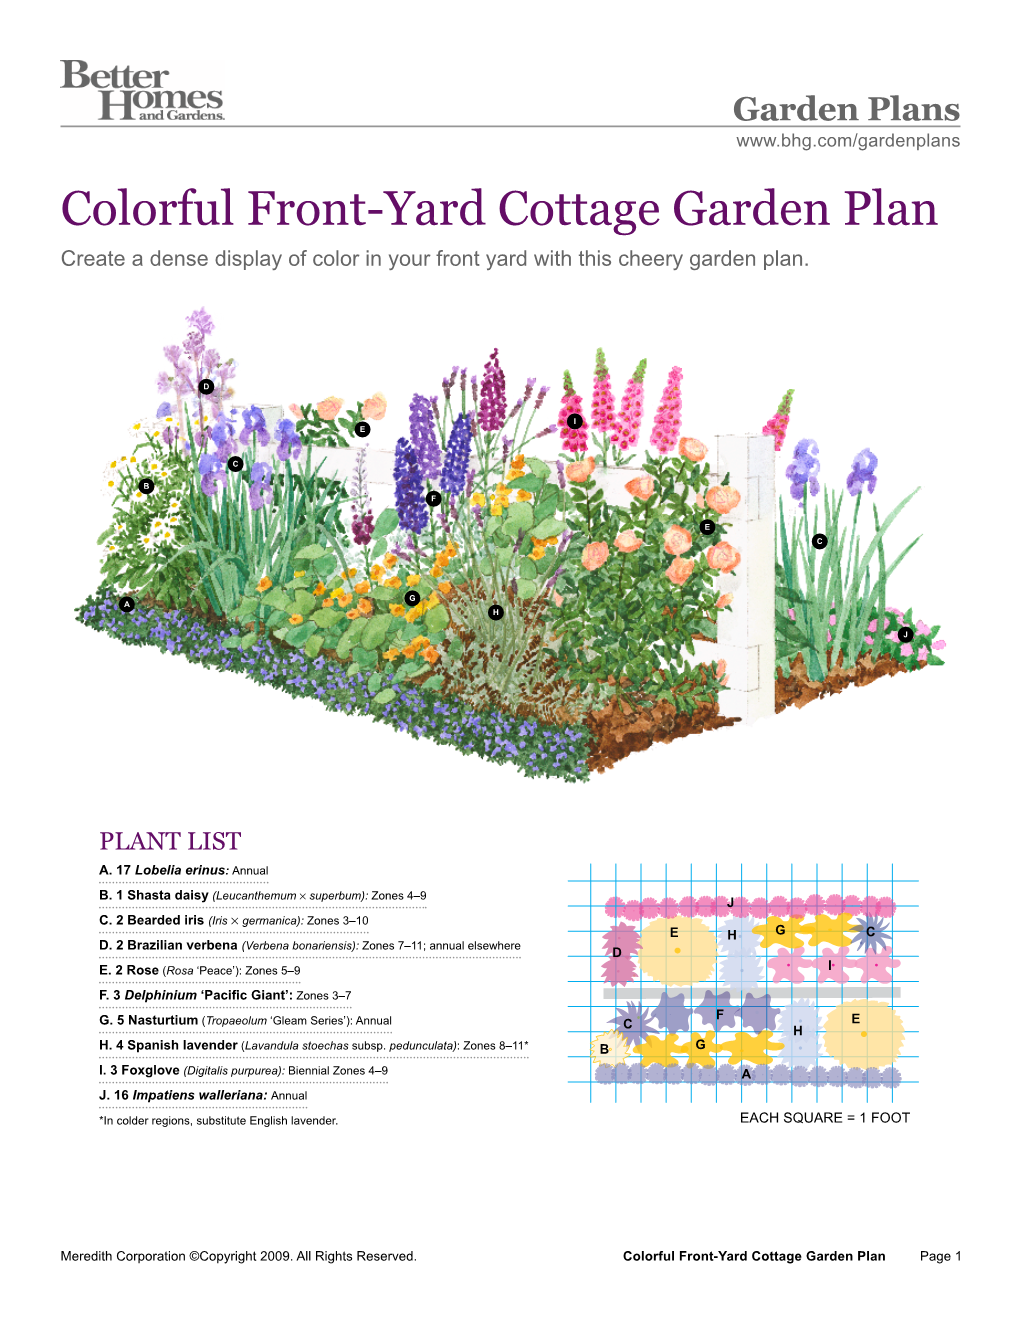 Colorful Front-Yard Cottage Garden Plan Create a Dense Display of Color in Your Front Yard with This Cheery Garden Plan